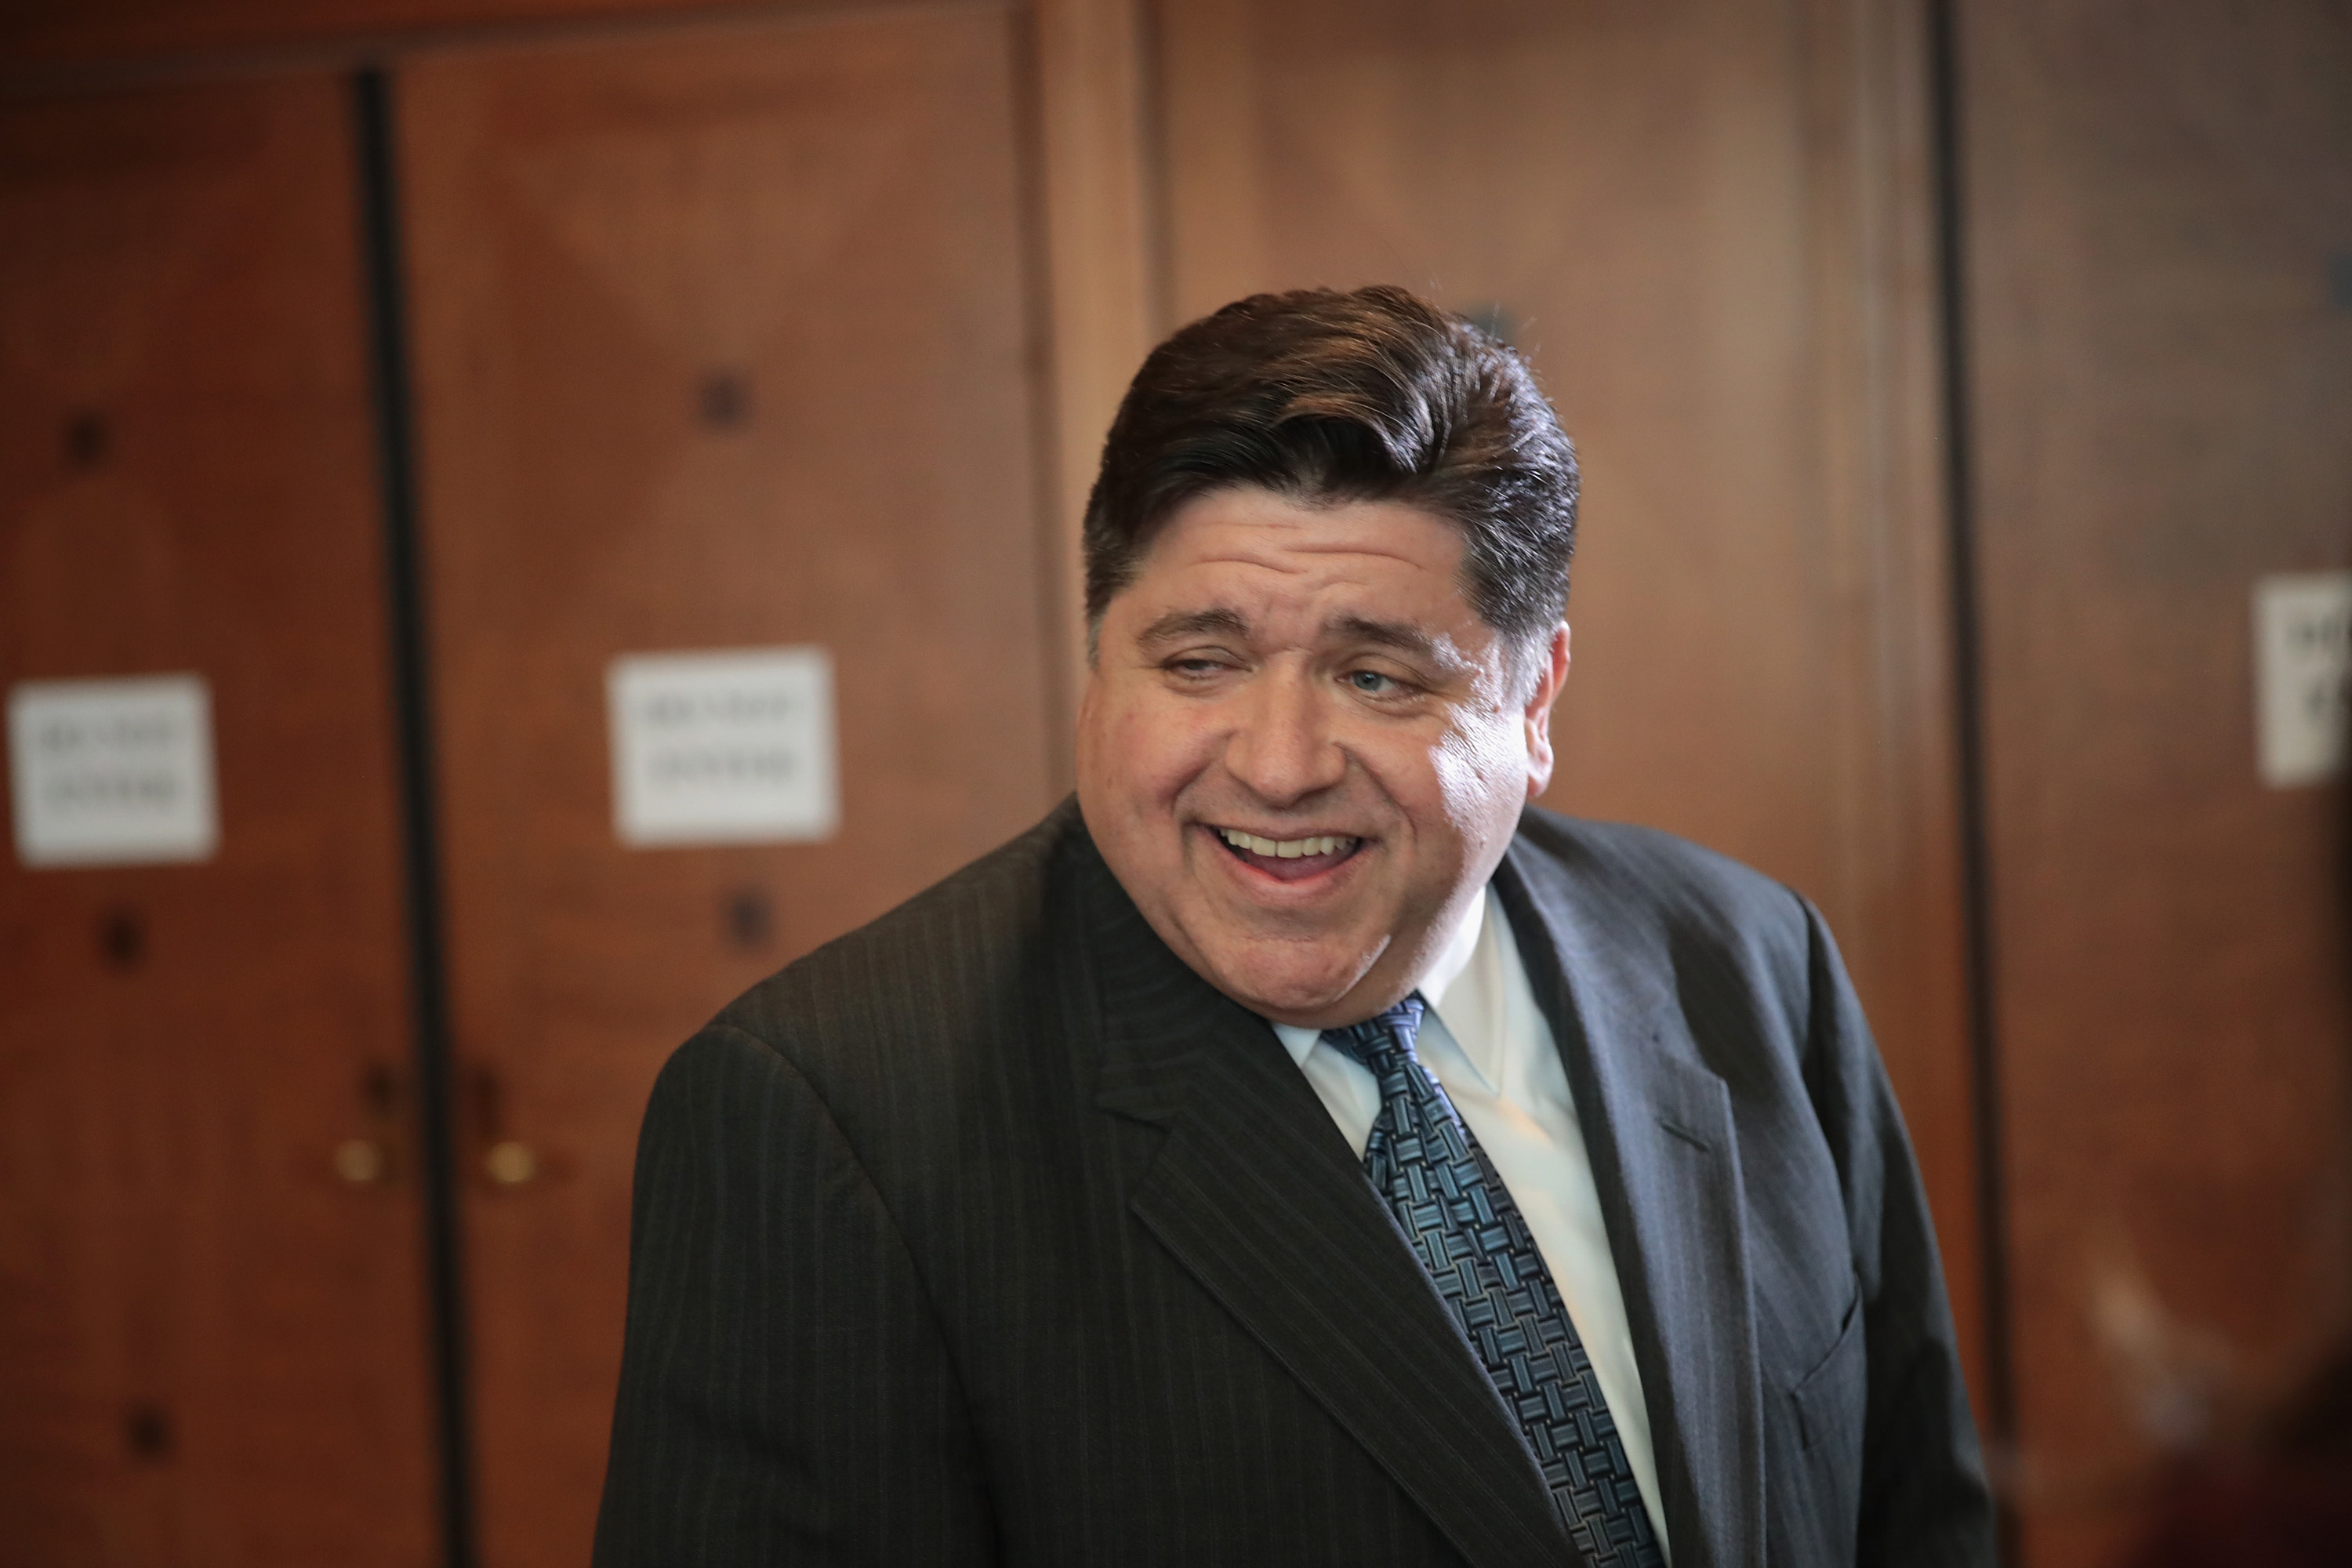 Illinois Gov. J.B. Pritzker attends the Idas Legacy Fundraiser Luncheon on April 12, 2018 in Chicago, Illinois. (Scott Olson/Getty Images)